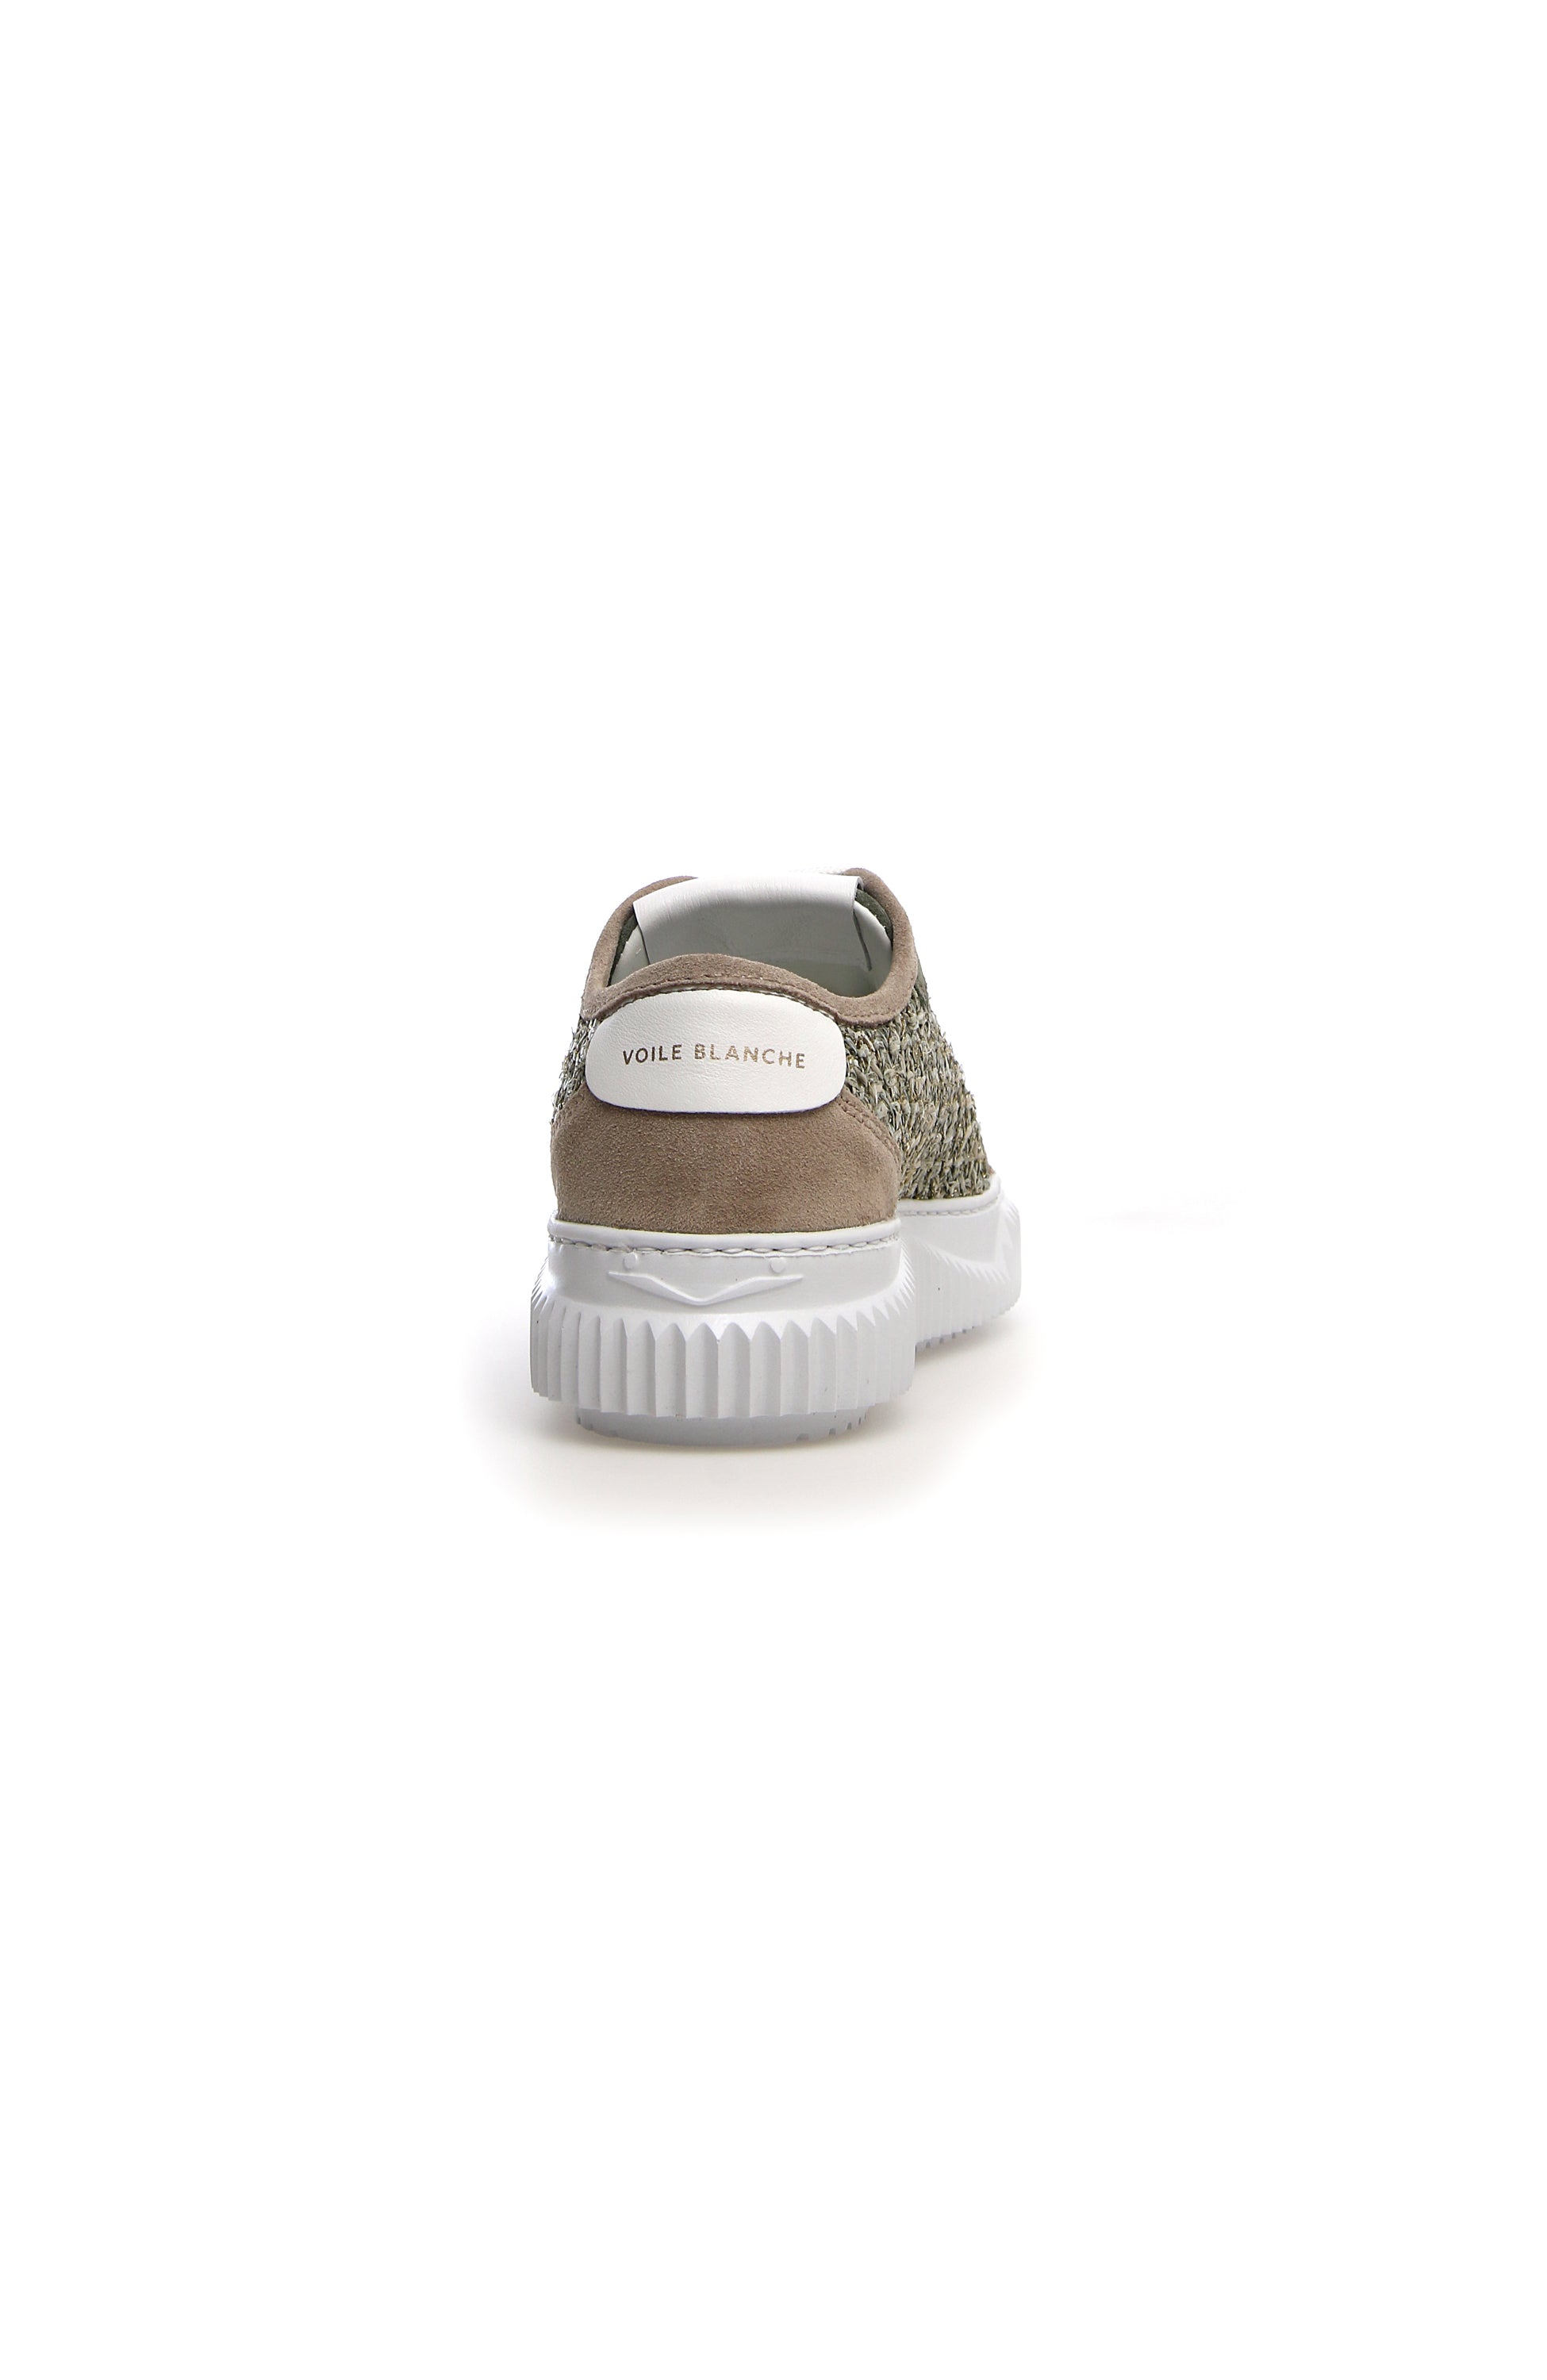 Suede low-top sneakers MAIORCA